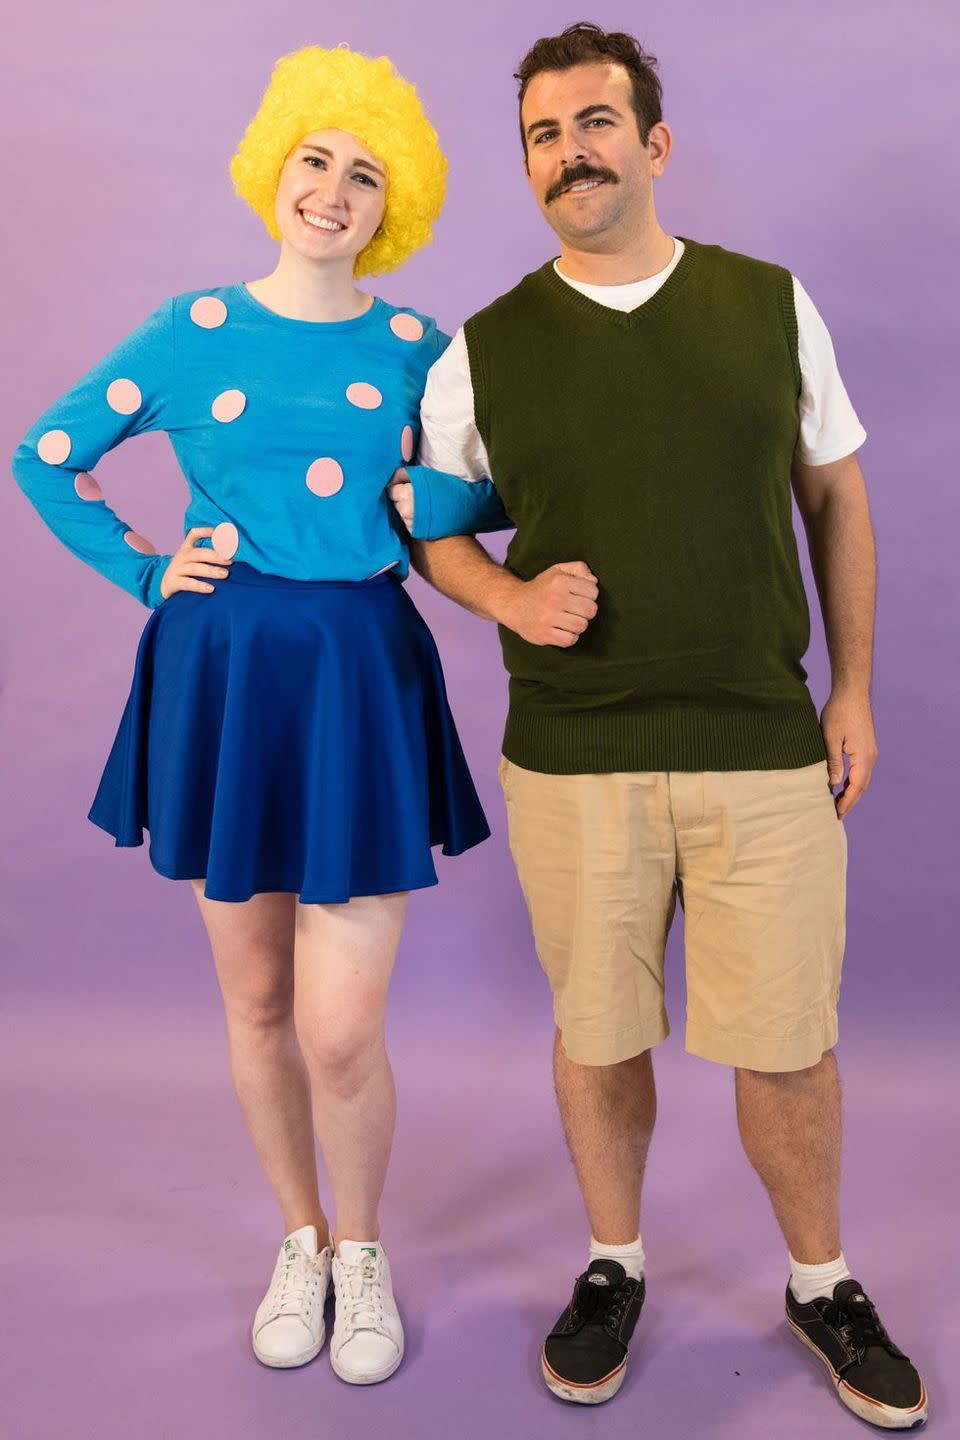 couples halloween costumes patti and doug from 'doug'